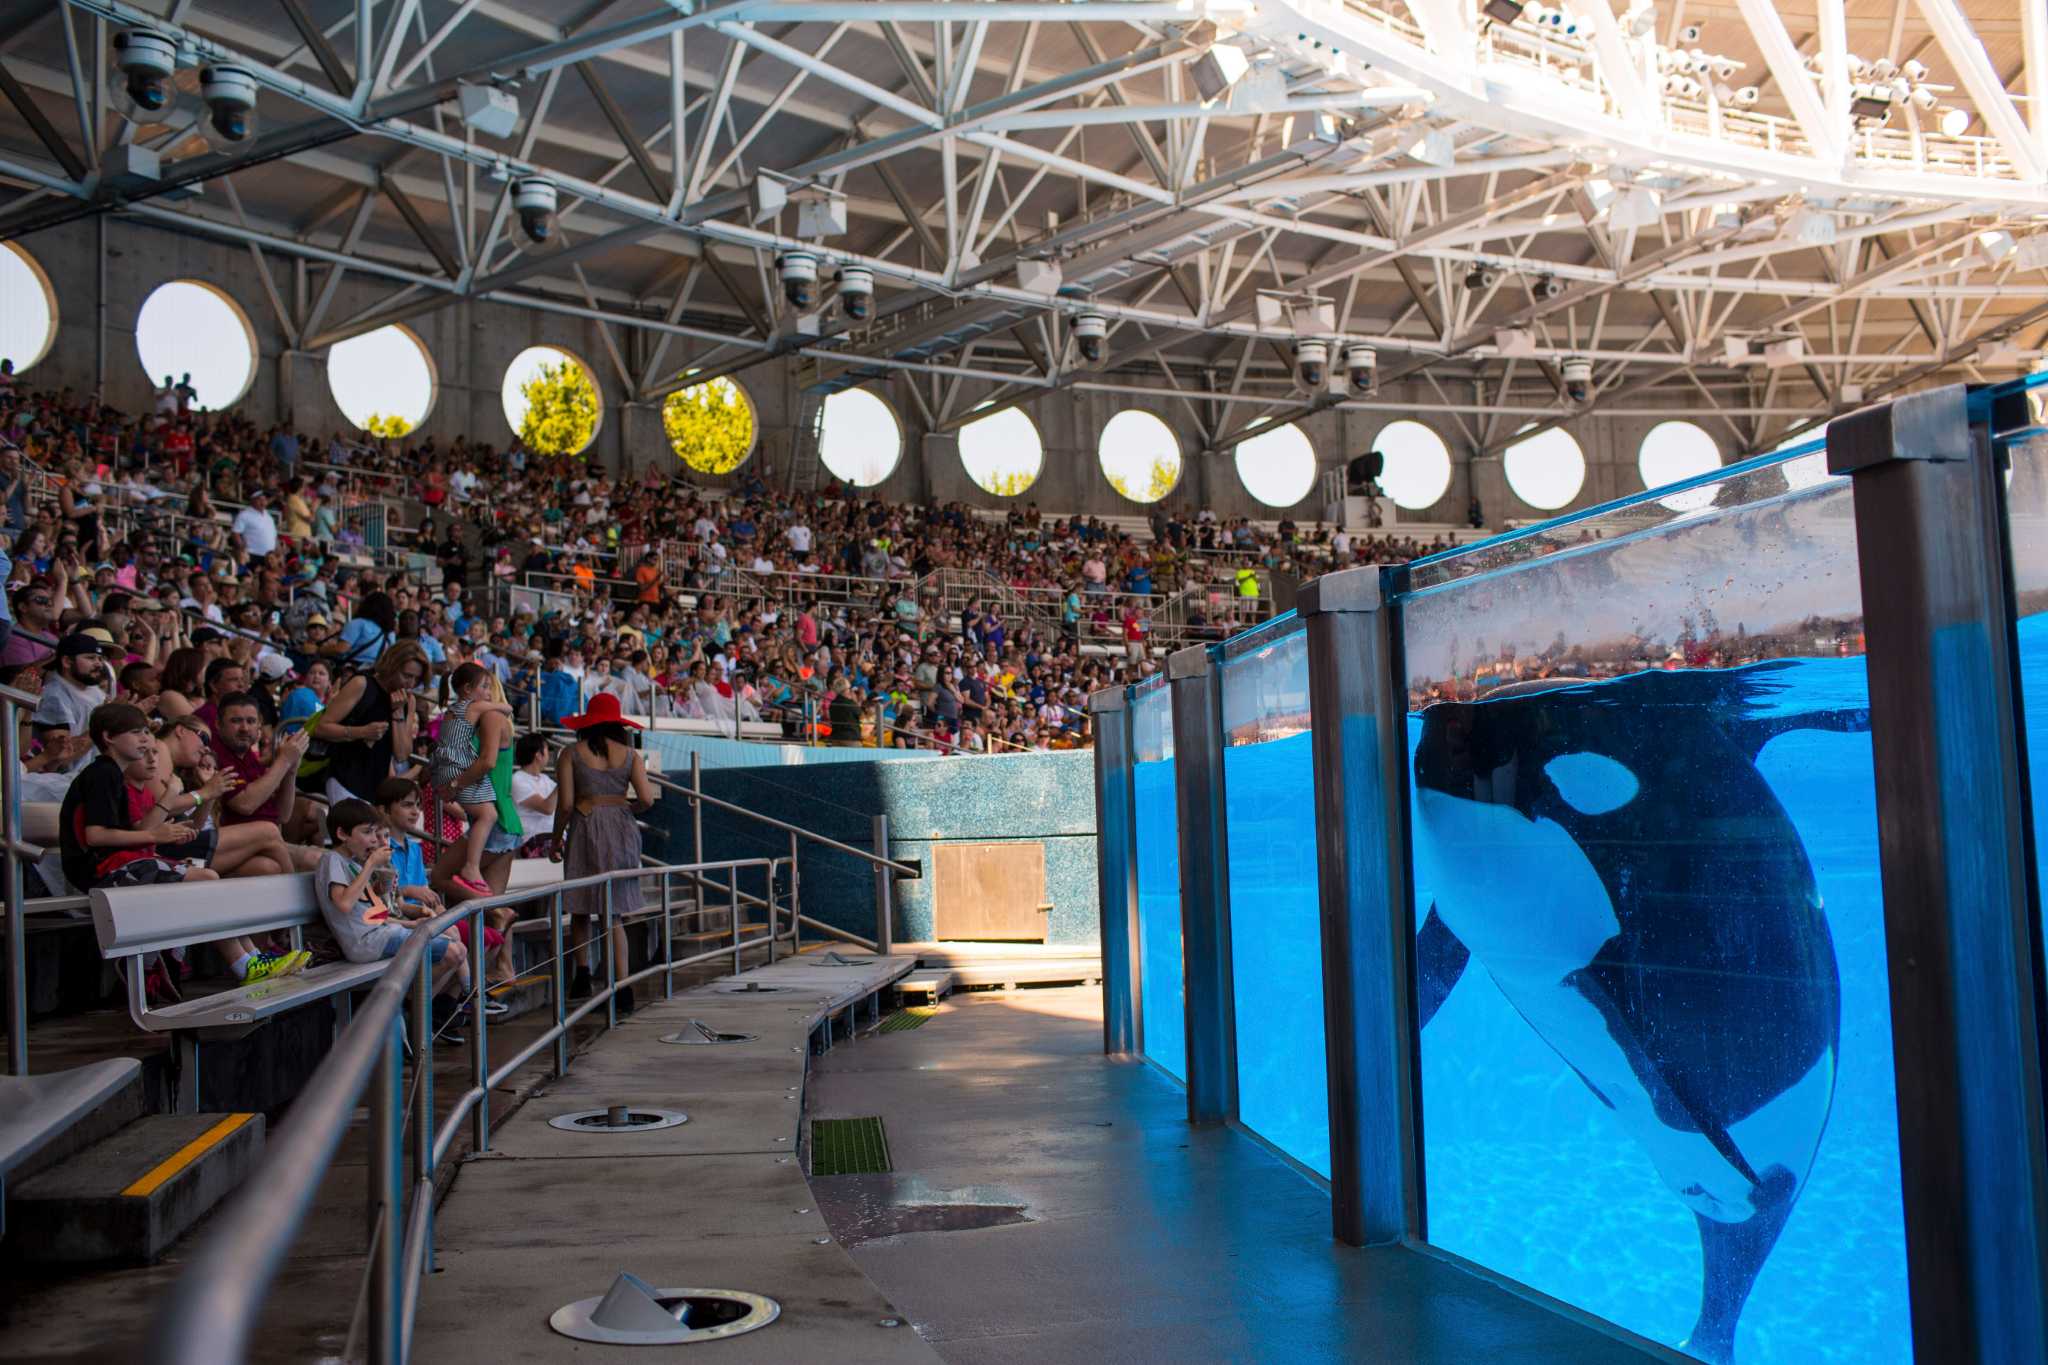 SeaWorld dividend cuts lead to stock woes, uncertainty - San Antonio Express-News2048 x 1365